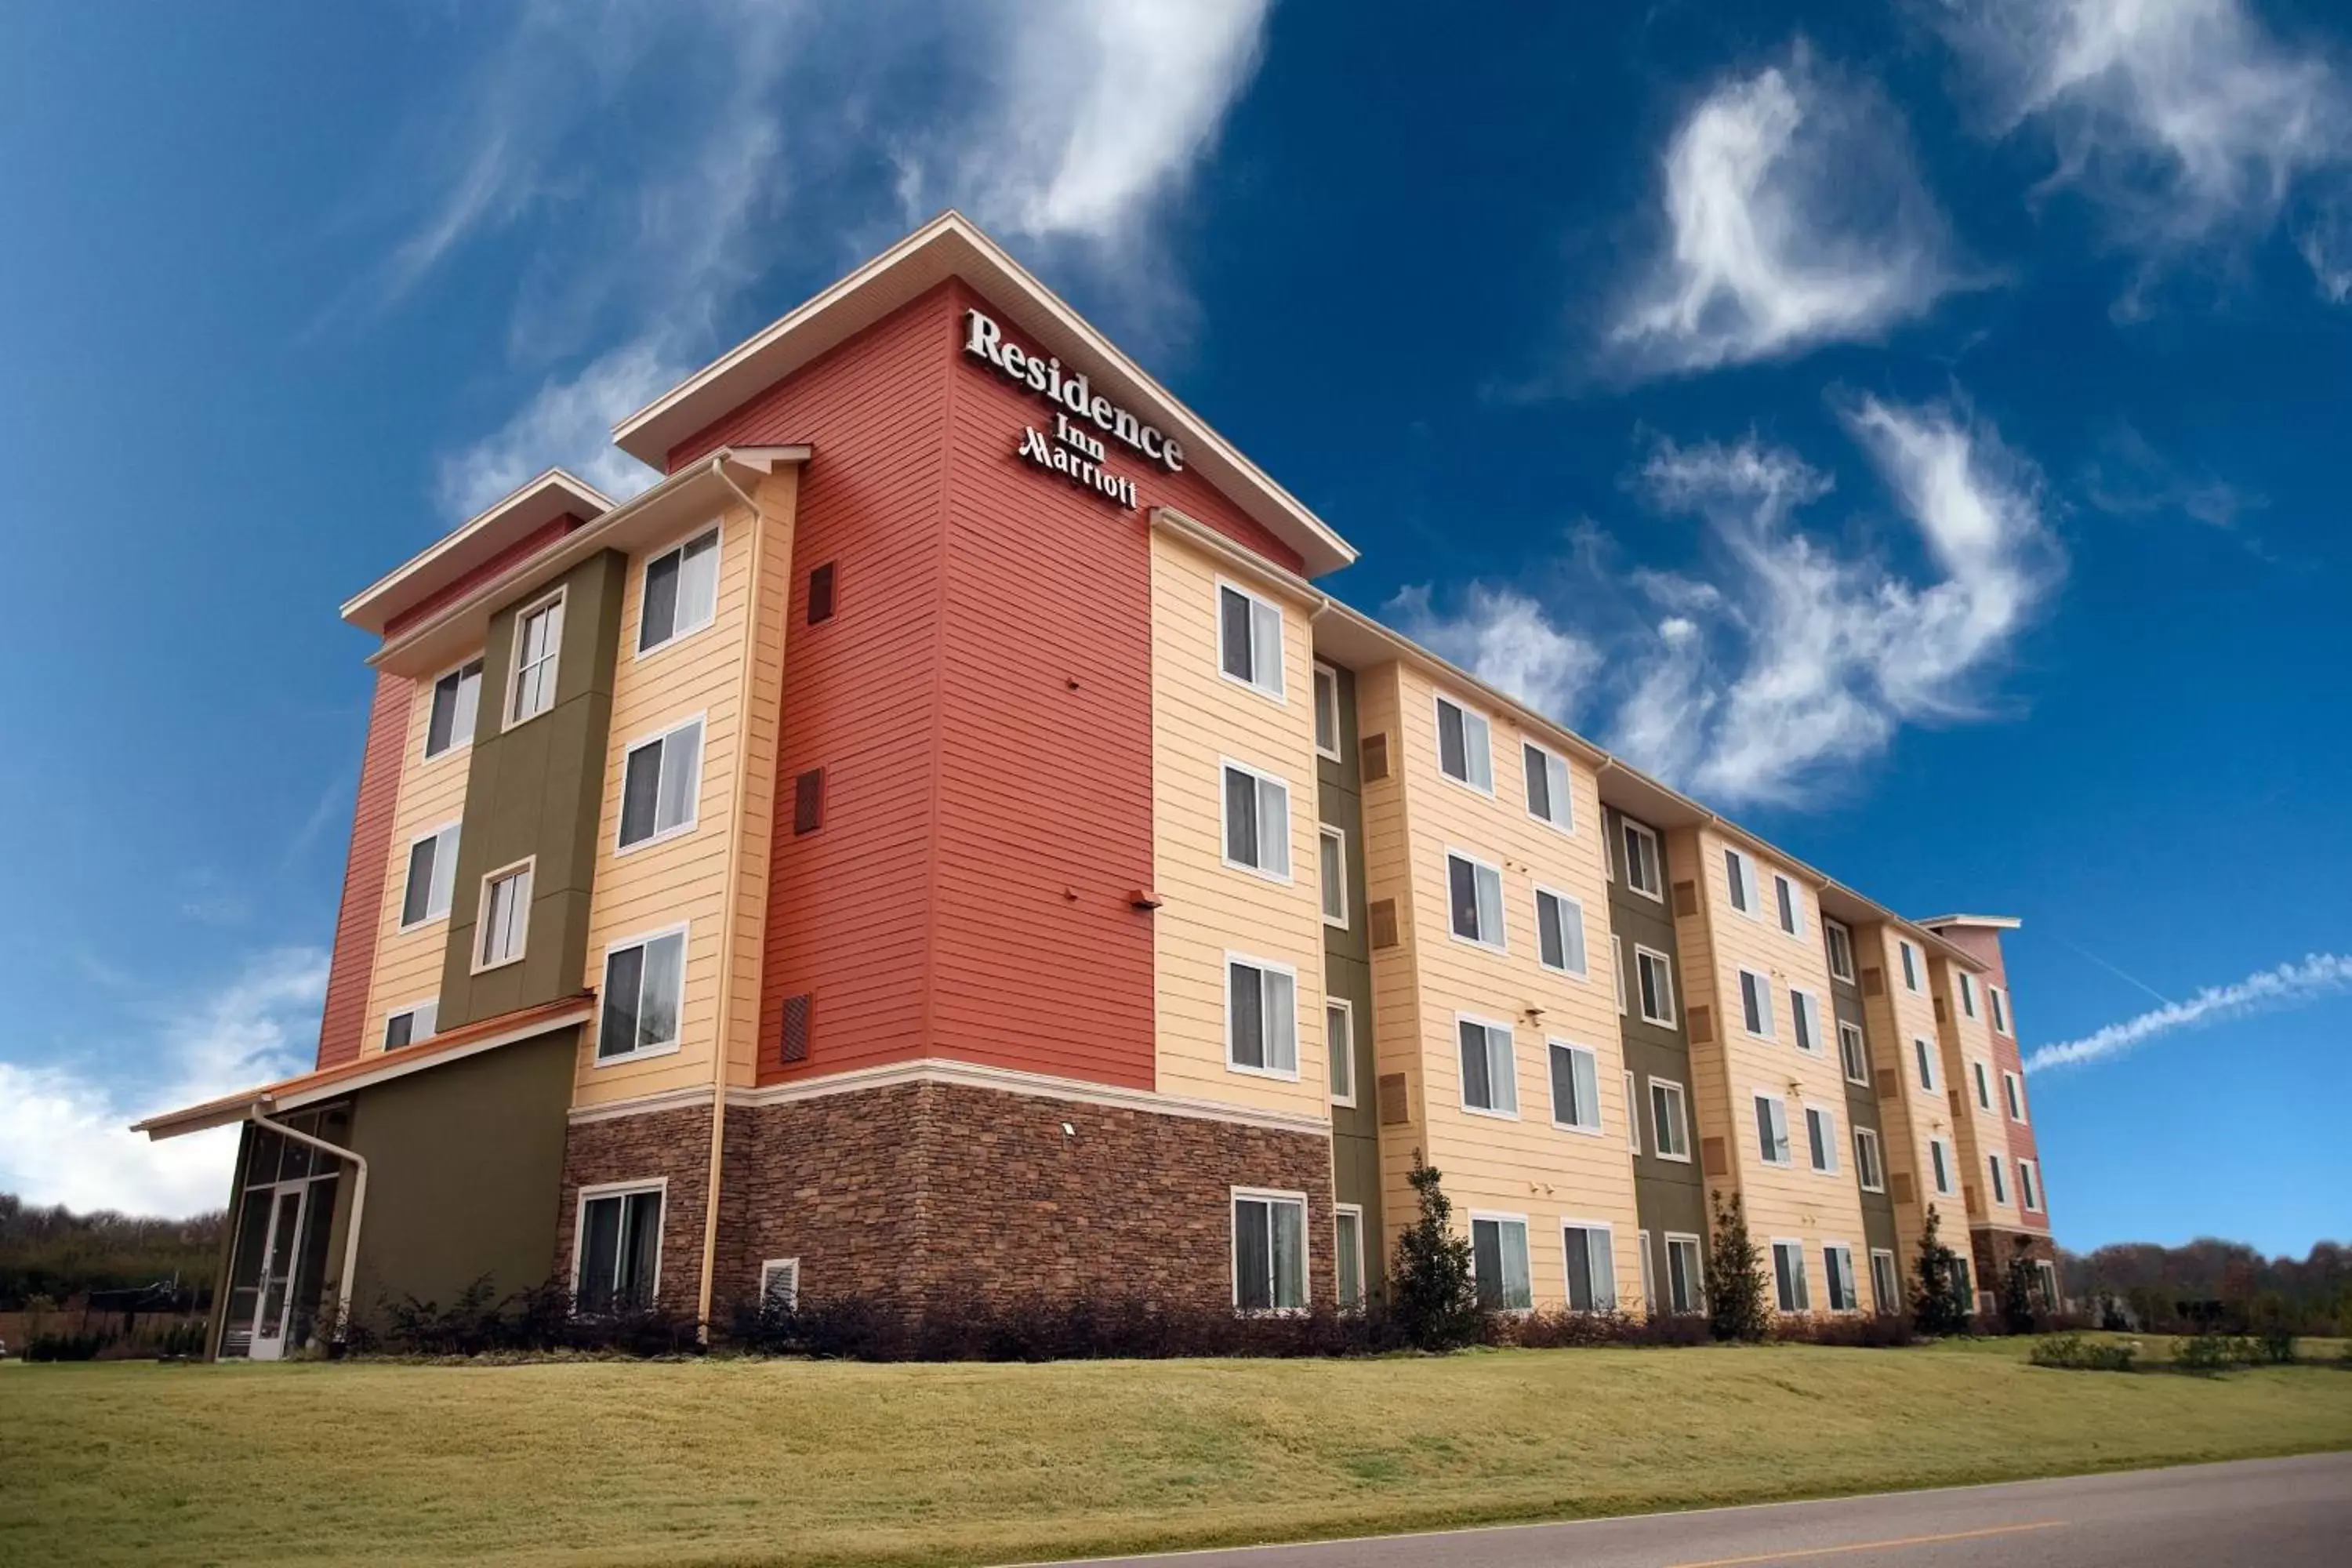 Property Building in Residence Inn by Marriott Florence